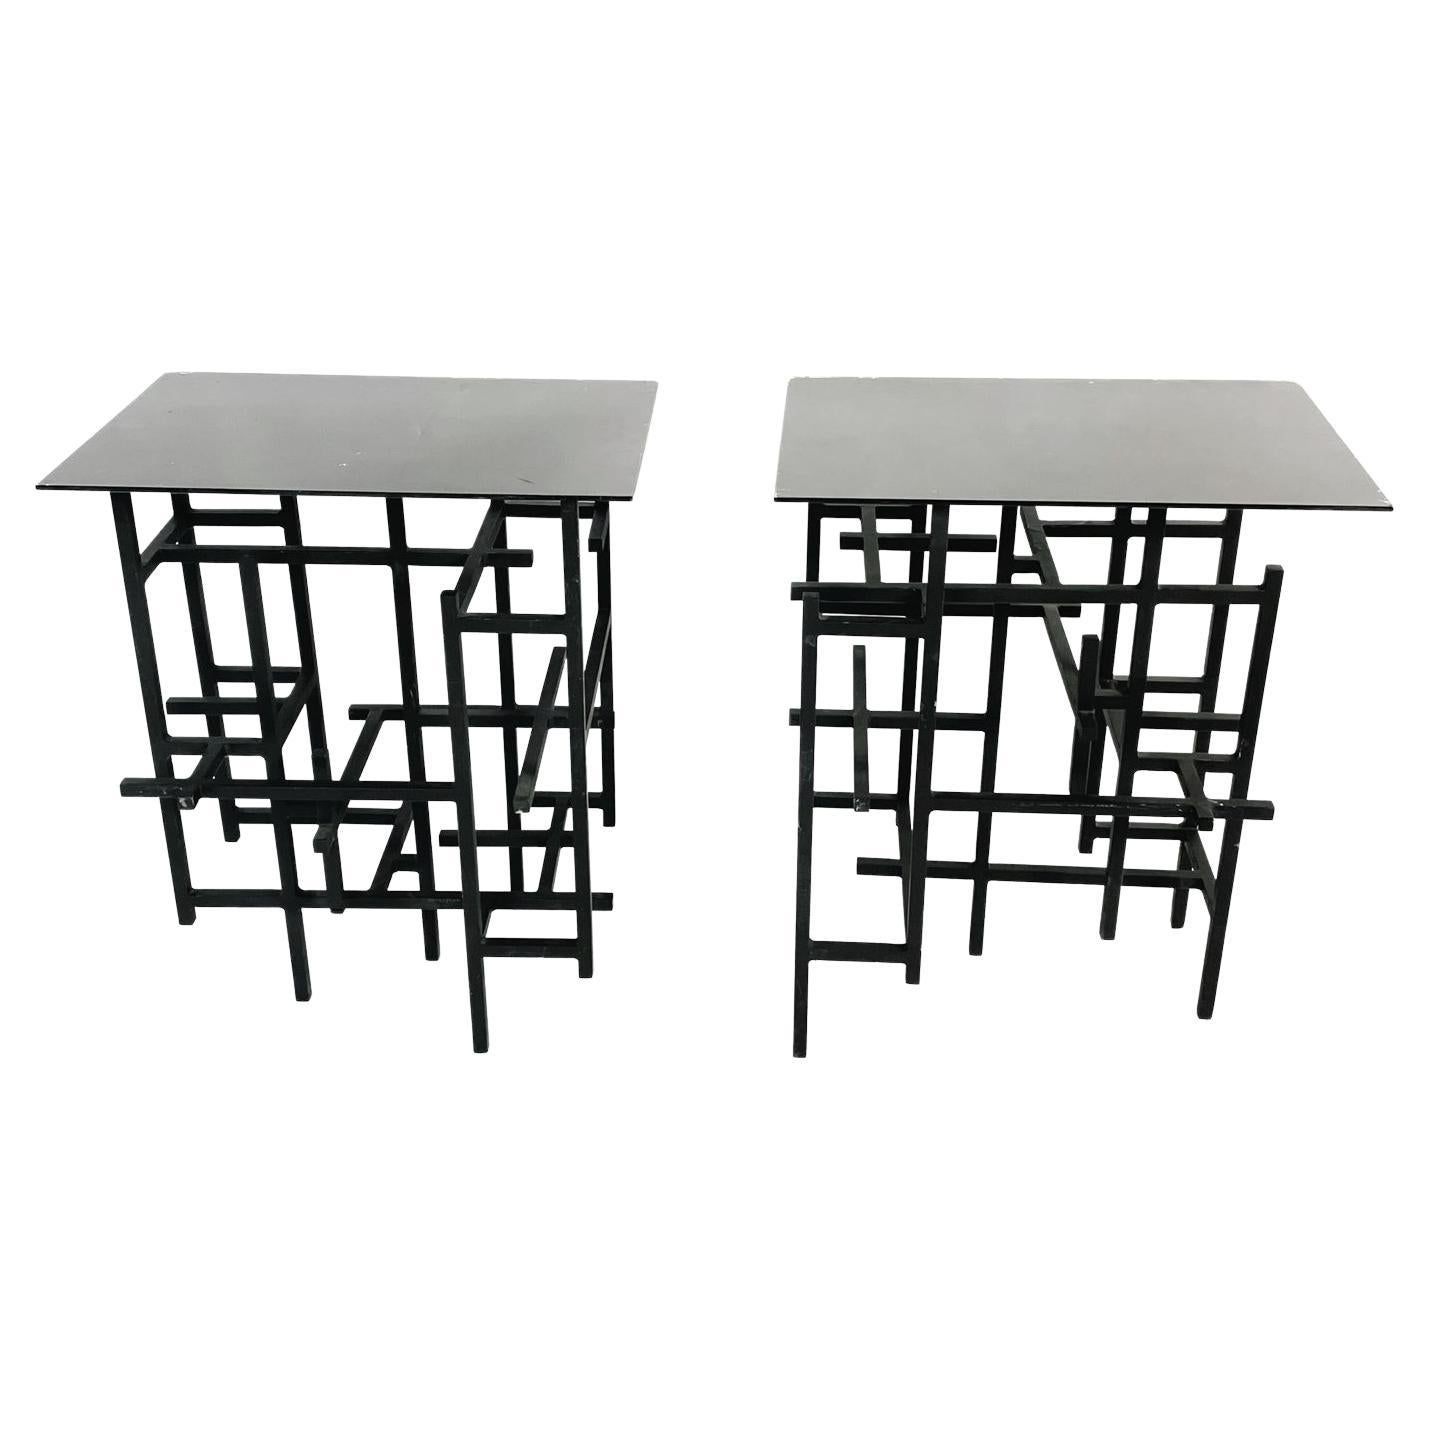 Pair of Steel & Glass End or Console Table For Sale